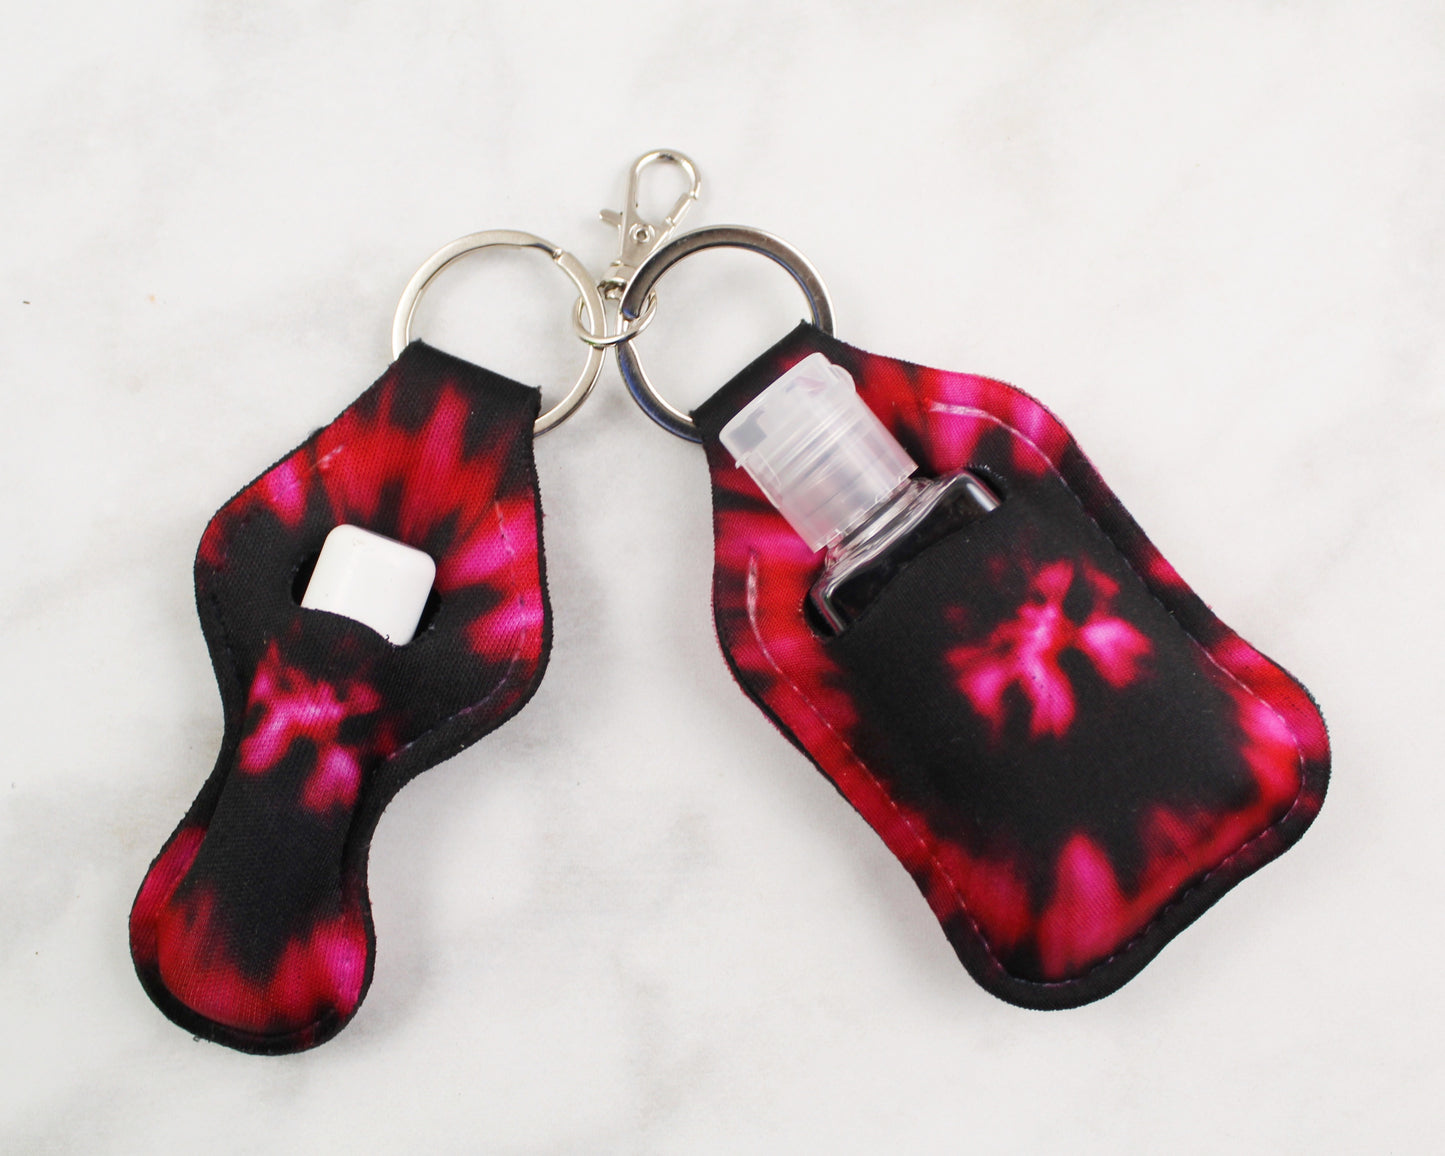 Hot Pink and Black Tie Dye Hand Sanitizer and Lip Balm Holders